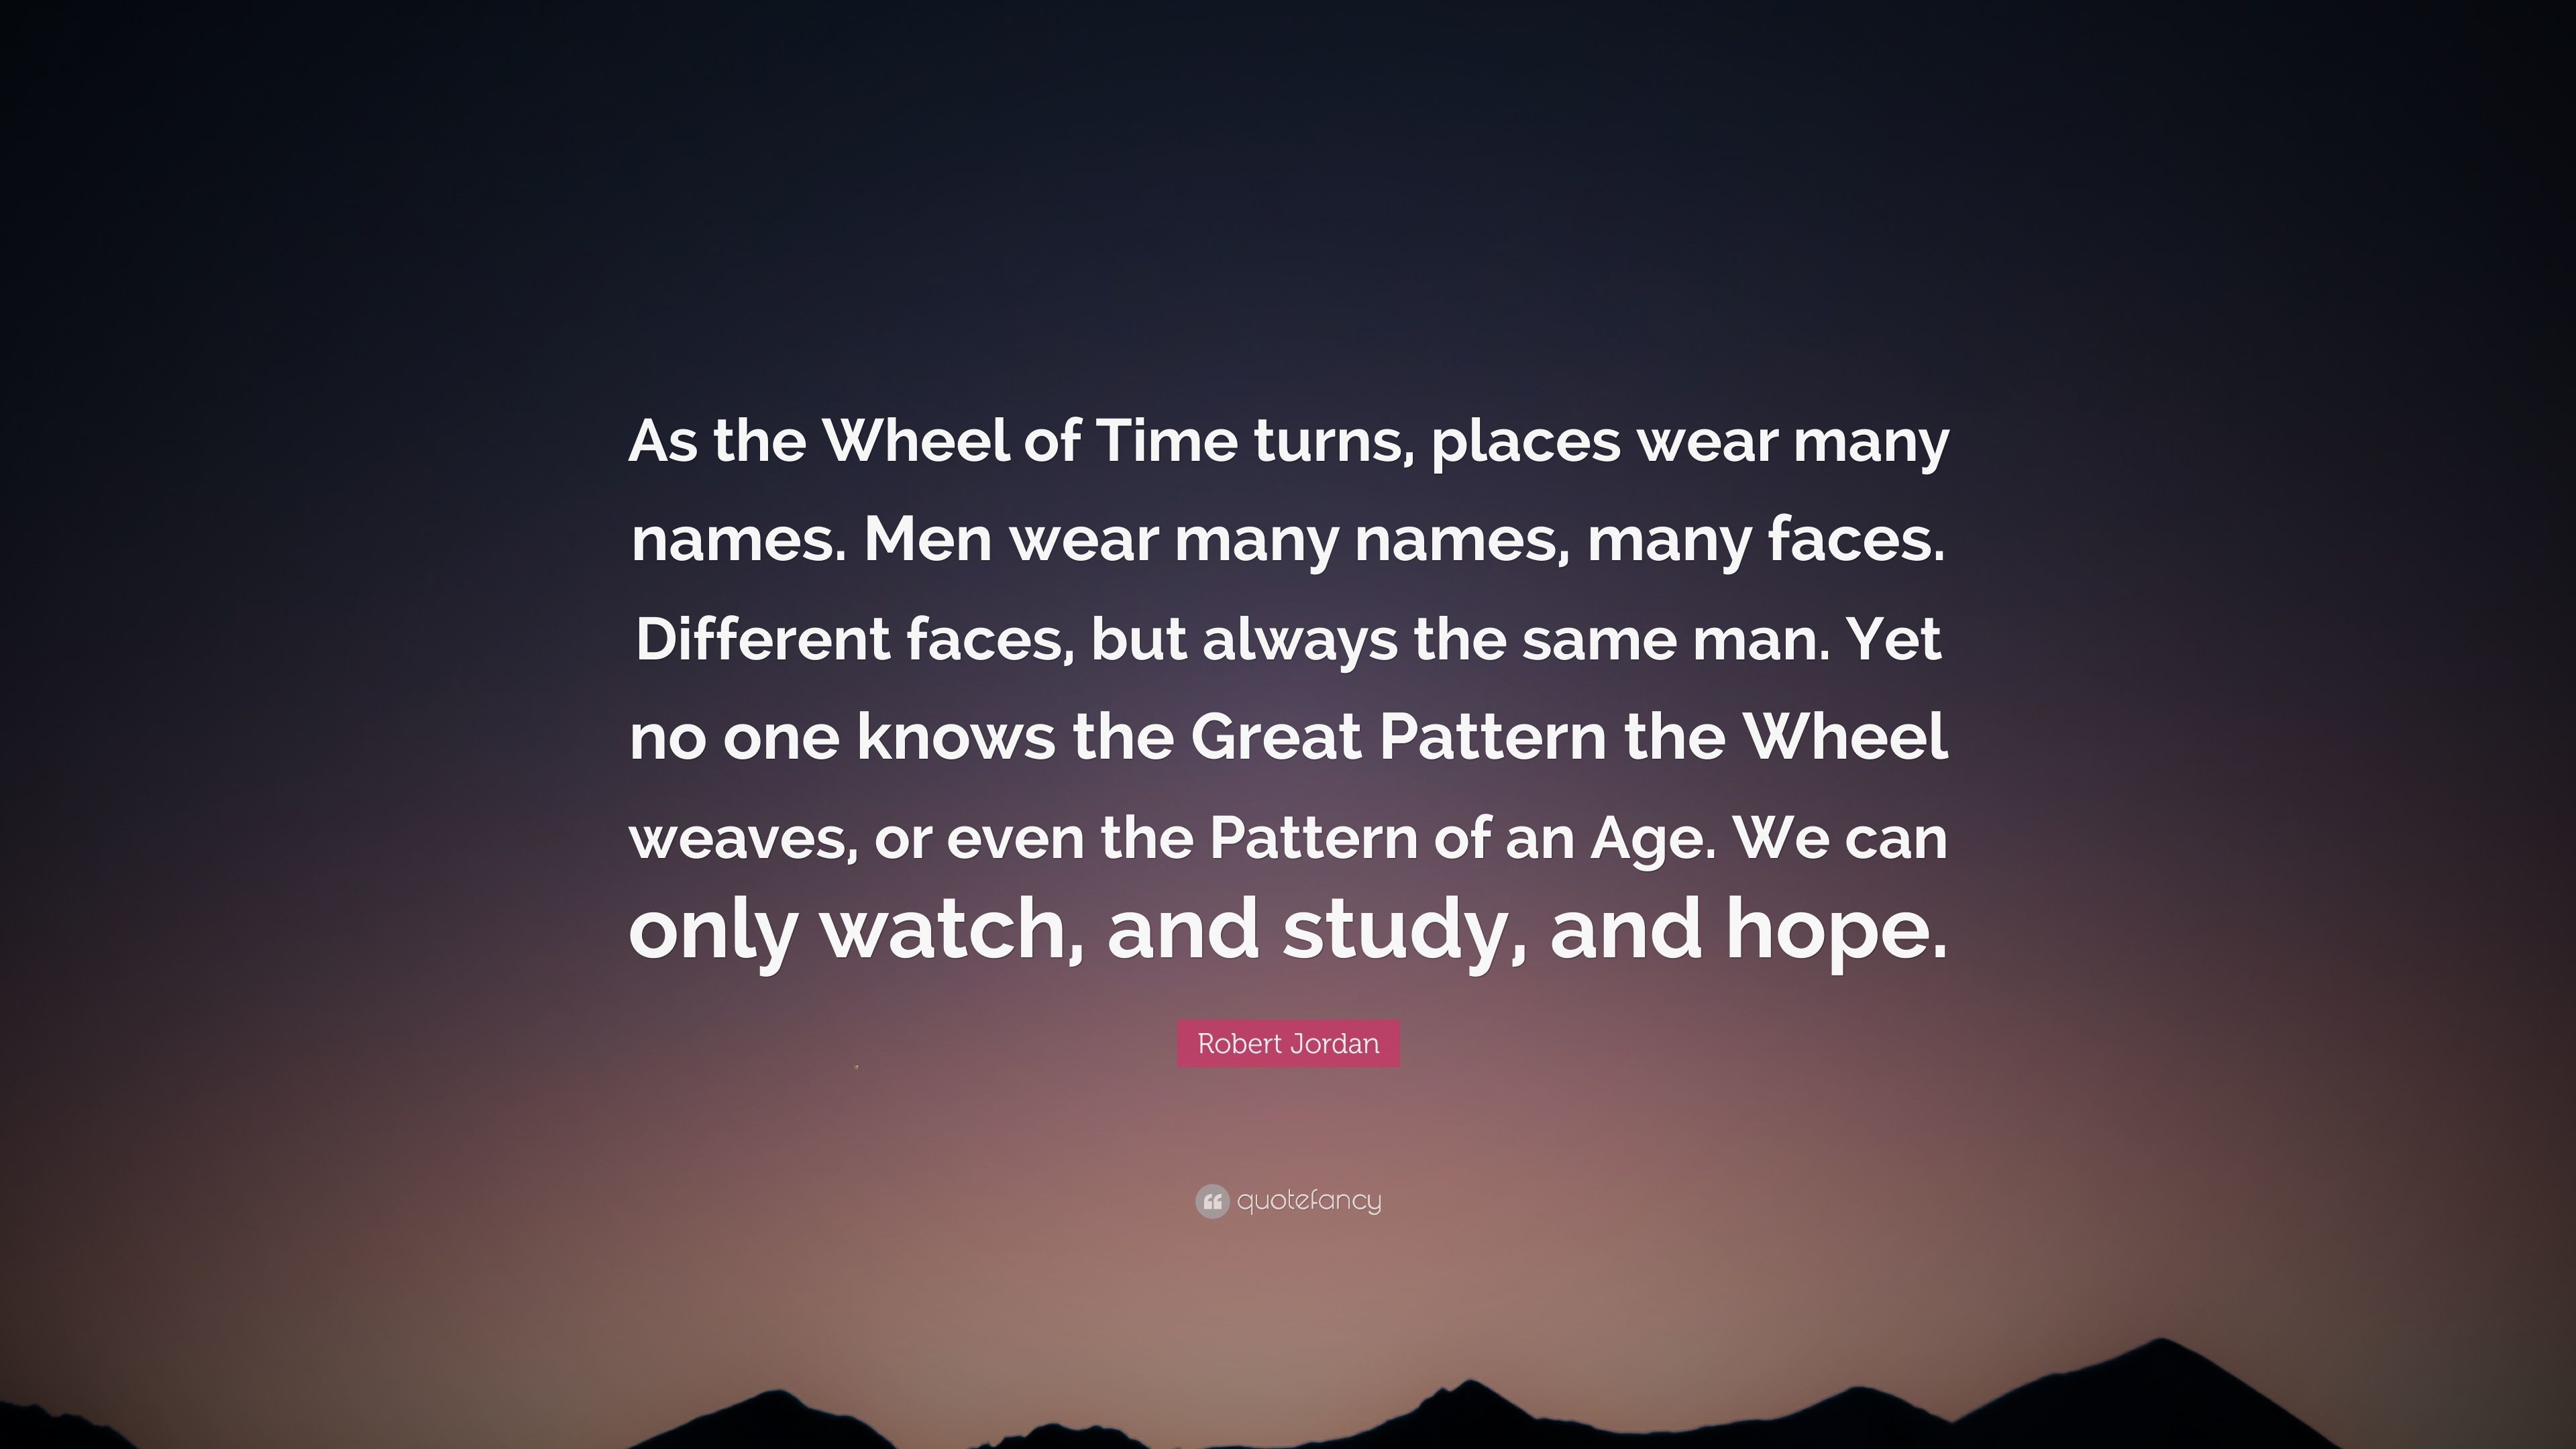 Robert Jordan Quote As the Wheel of Time turns, places wear many names